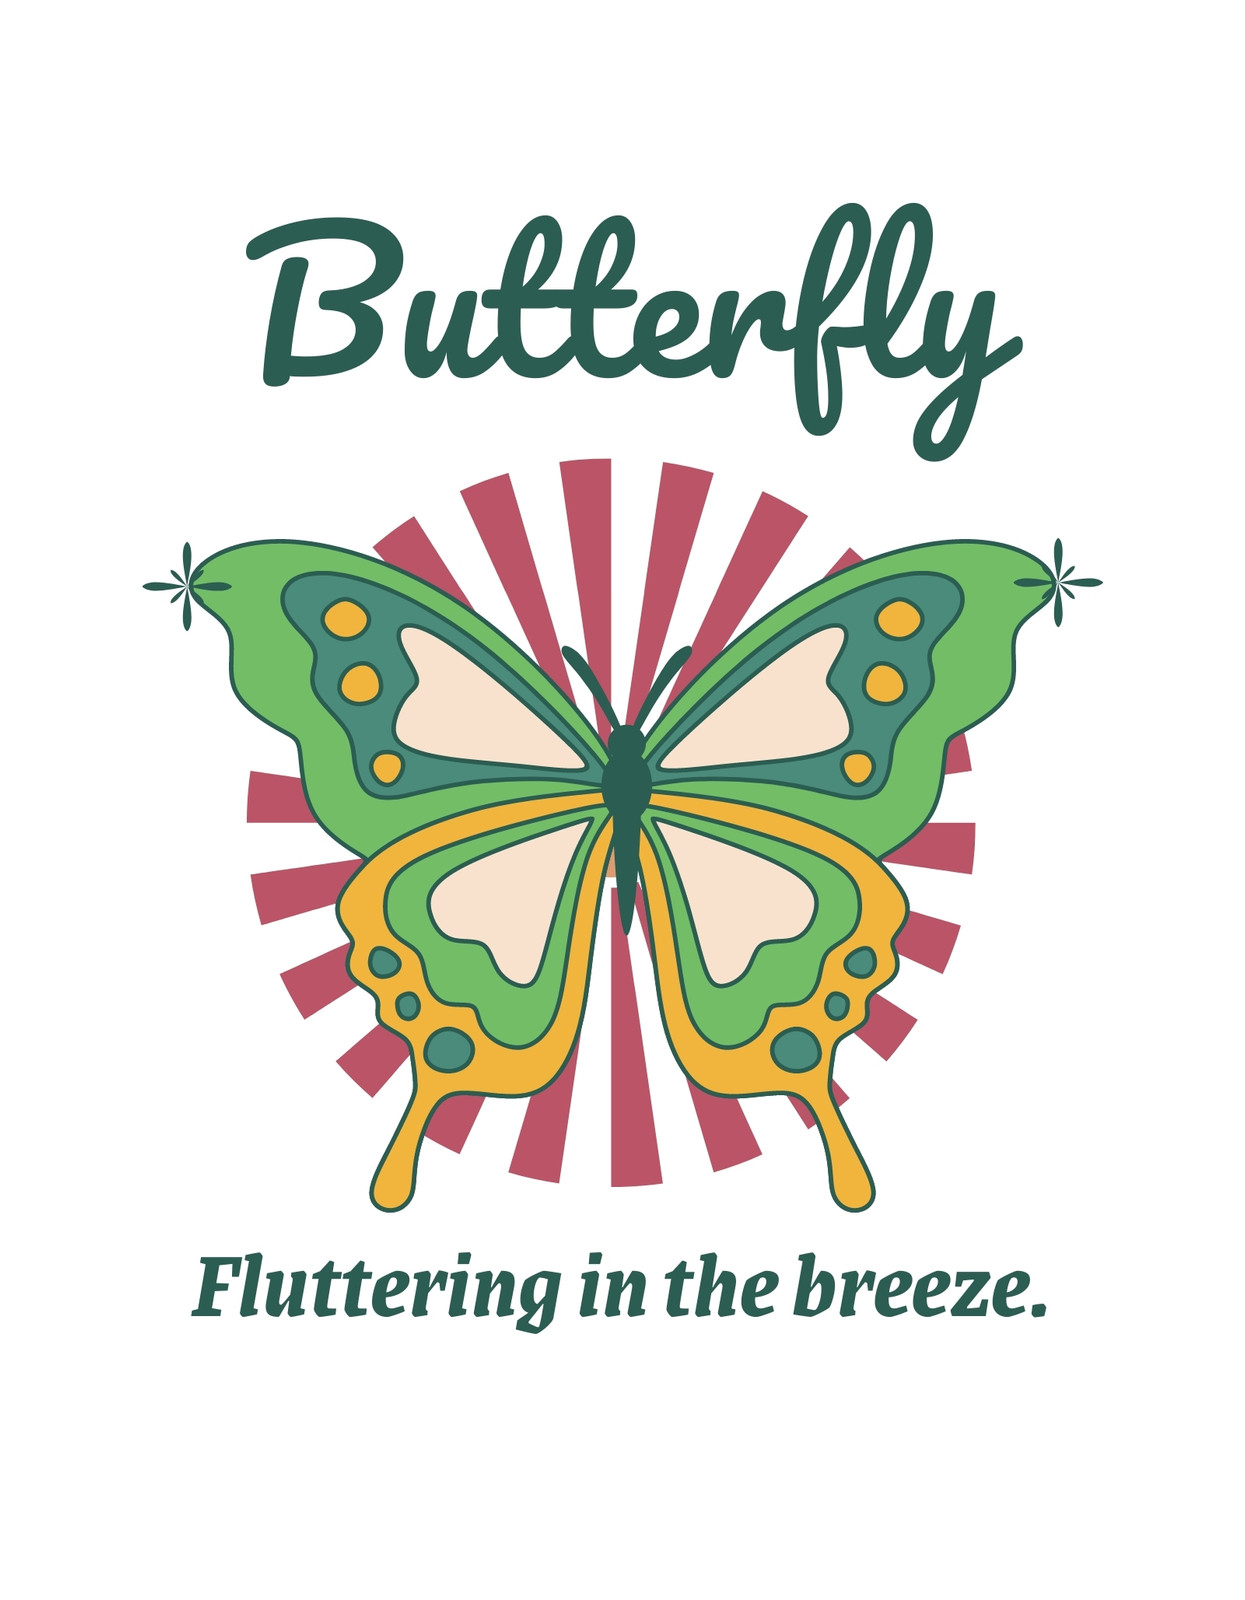 Page 9 - Free and customizable butterfly templates